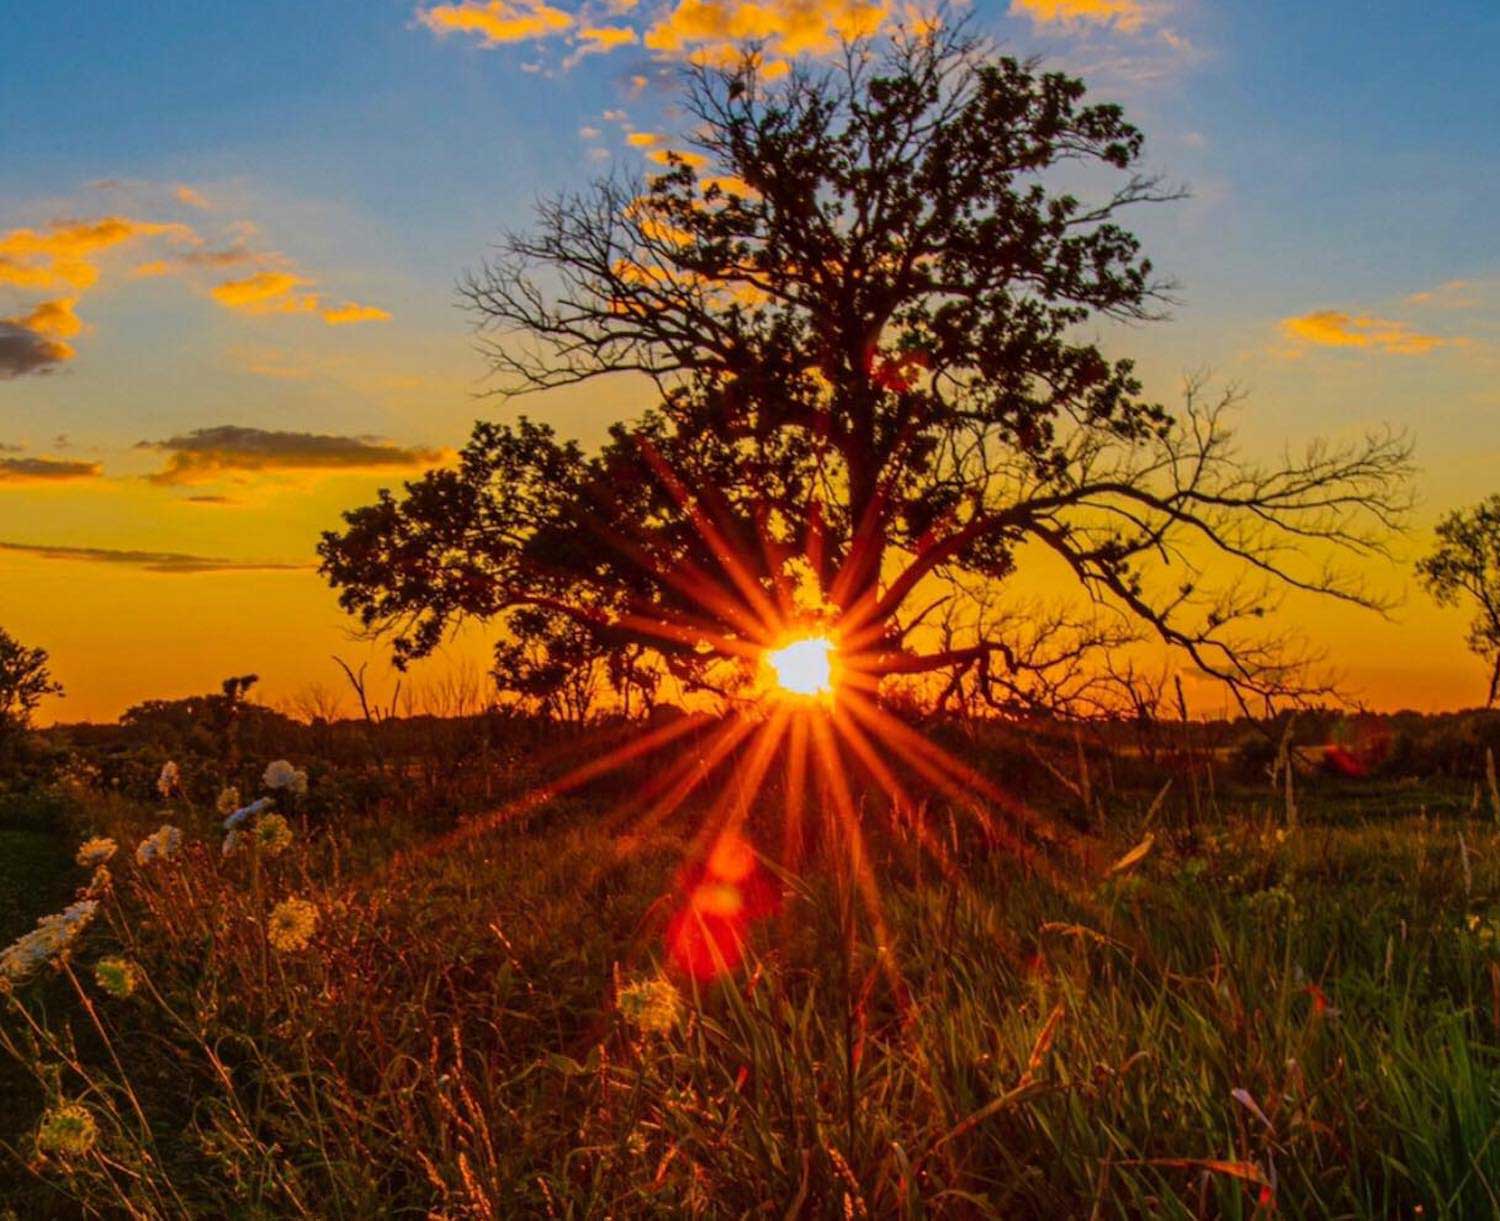 The sun setting behind a tree.